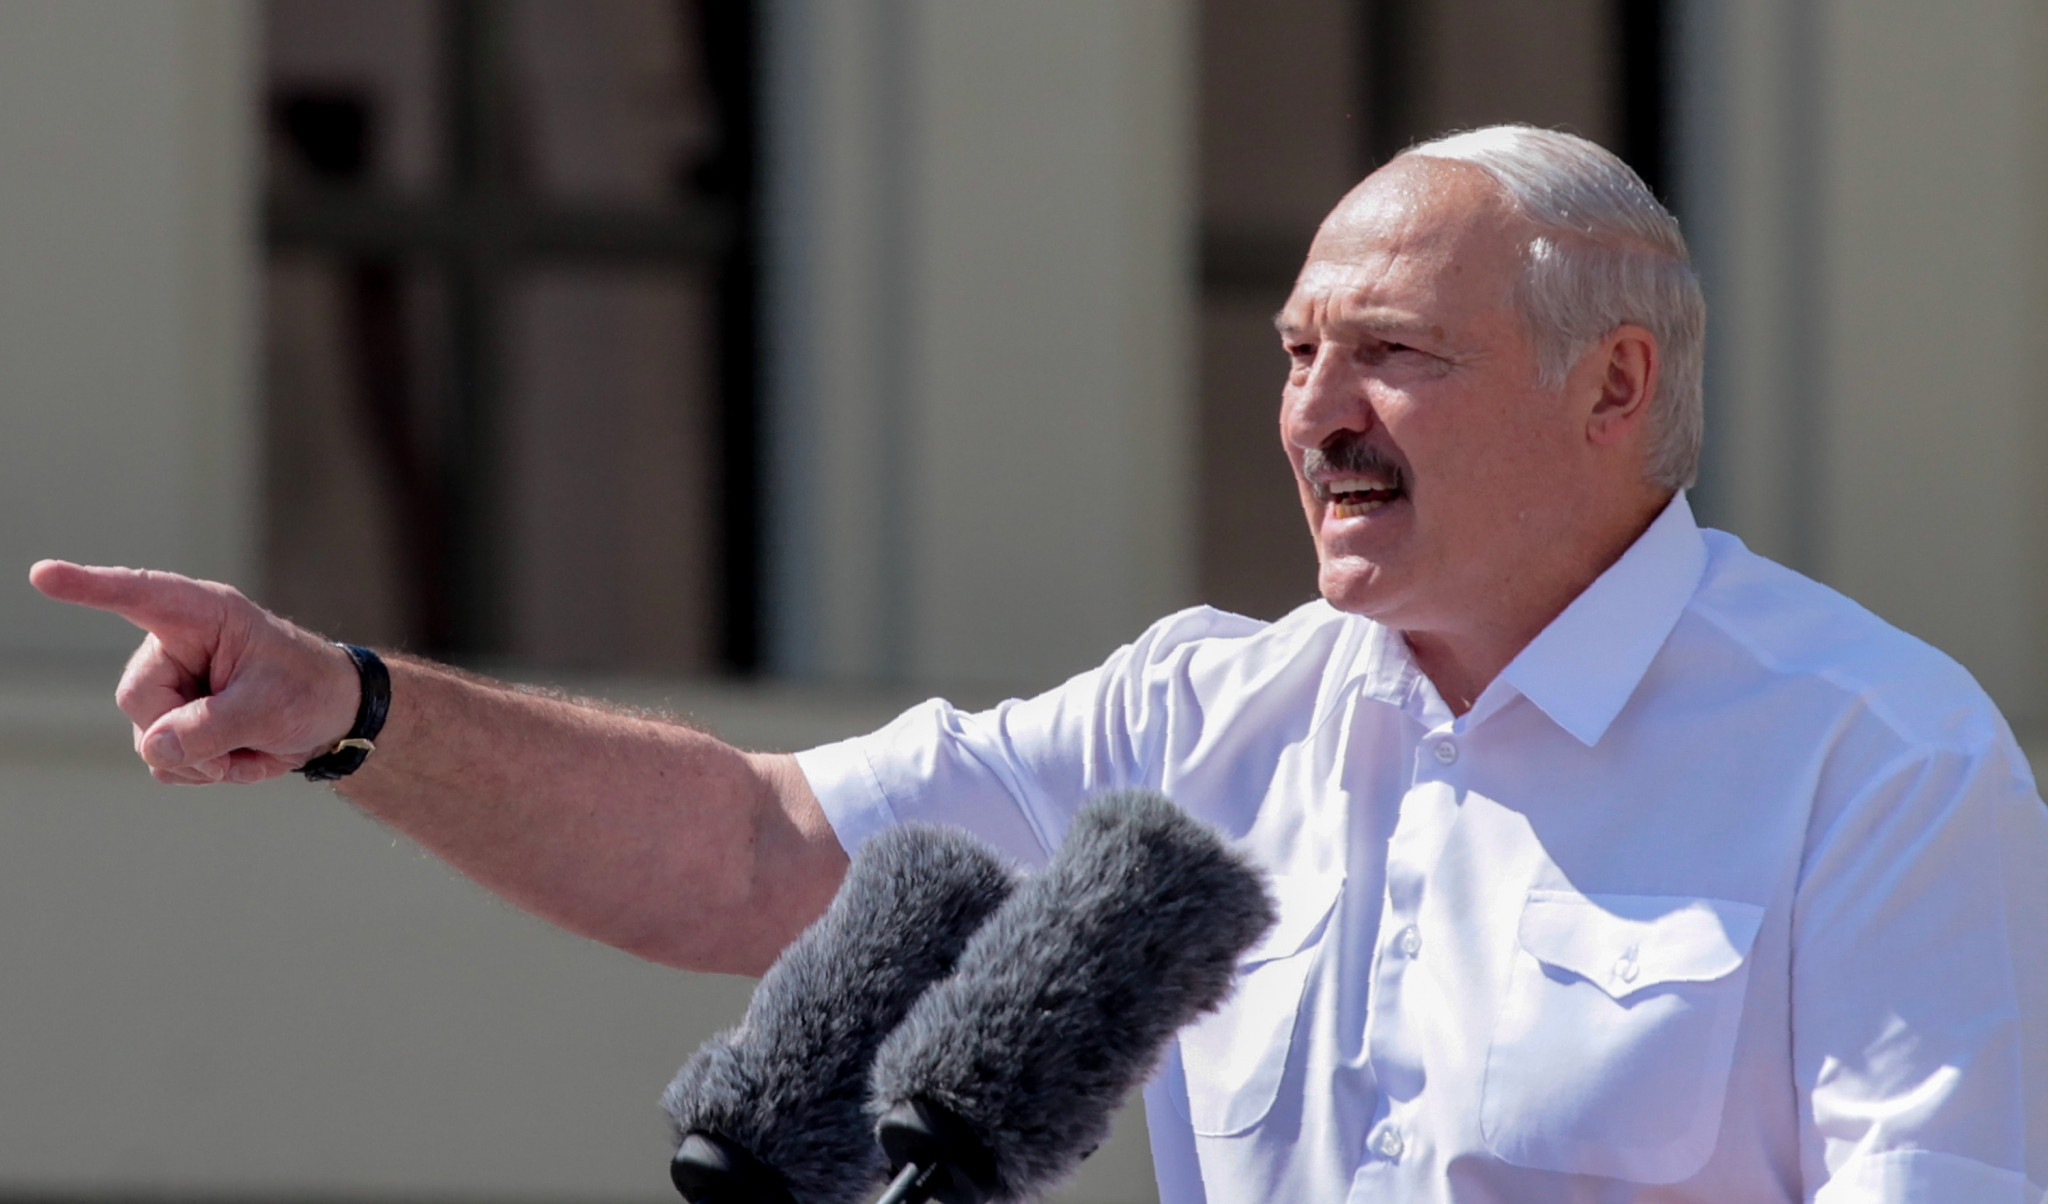 More than 100 Belarusian athletes have signed an open letter calling for the results of the country's Presidential election, won by Alexander Lukashenko, to be invalidated ©Getty Images